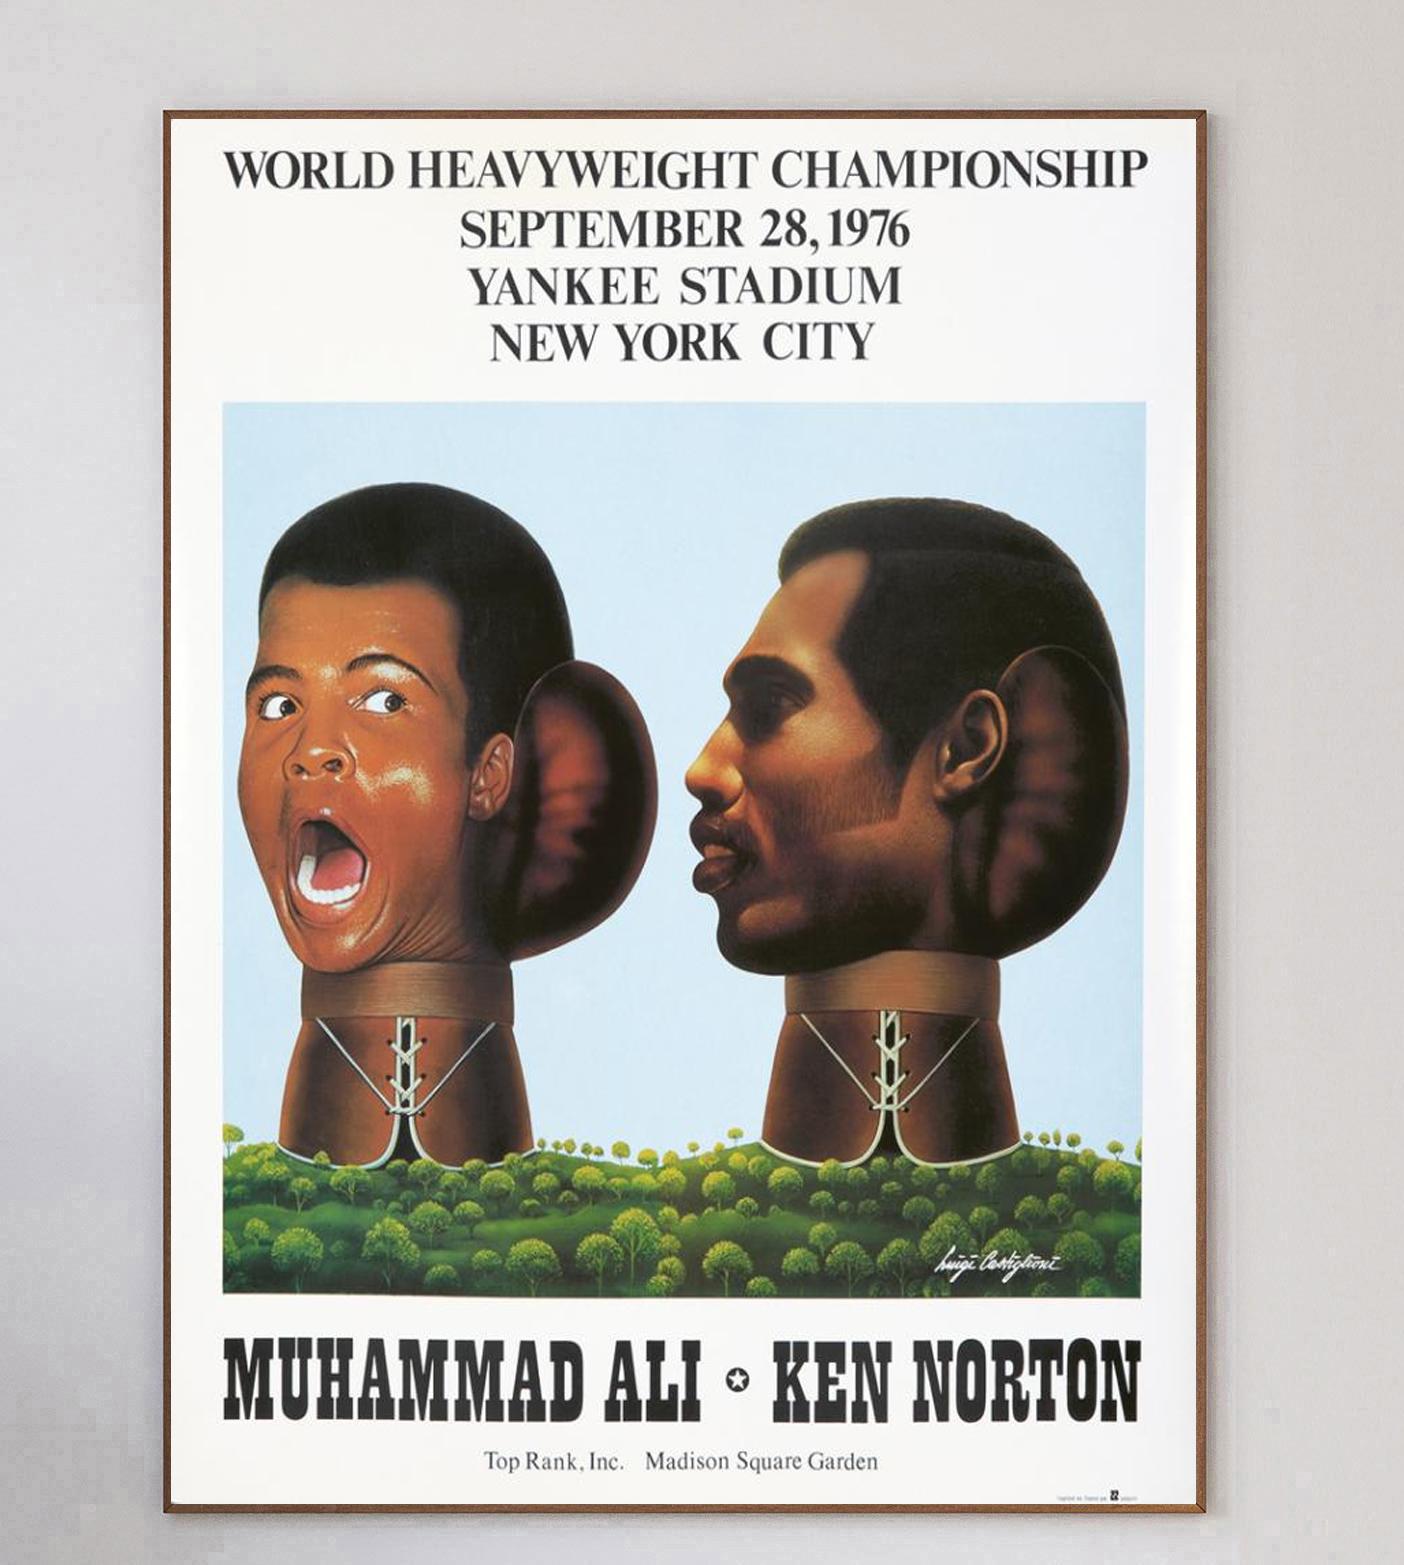 With wonderful artwork from Italian poster artist Luigi Castiglioni, this brilliant poster was created to promote the World Heavyweight Championship fight between the legendary Muhammad Ali and Ken Norton.

The fight was held on September 28, in